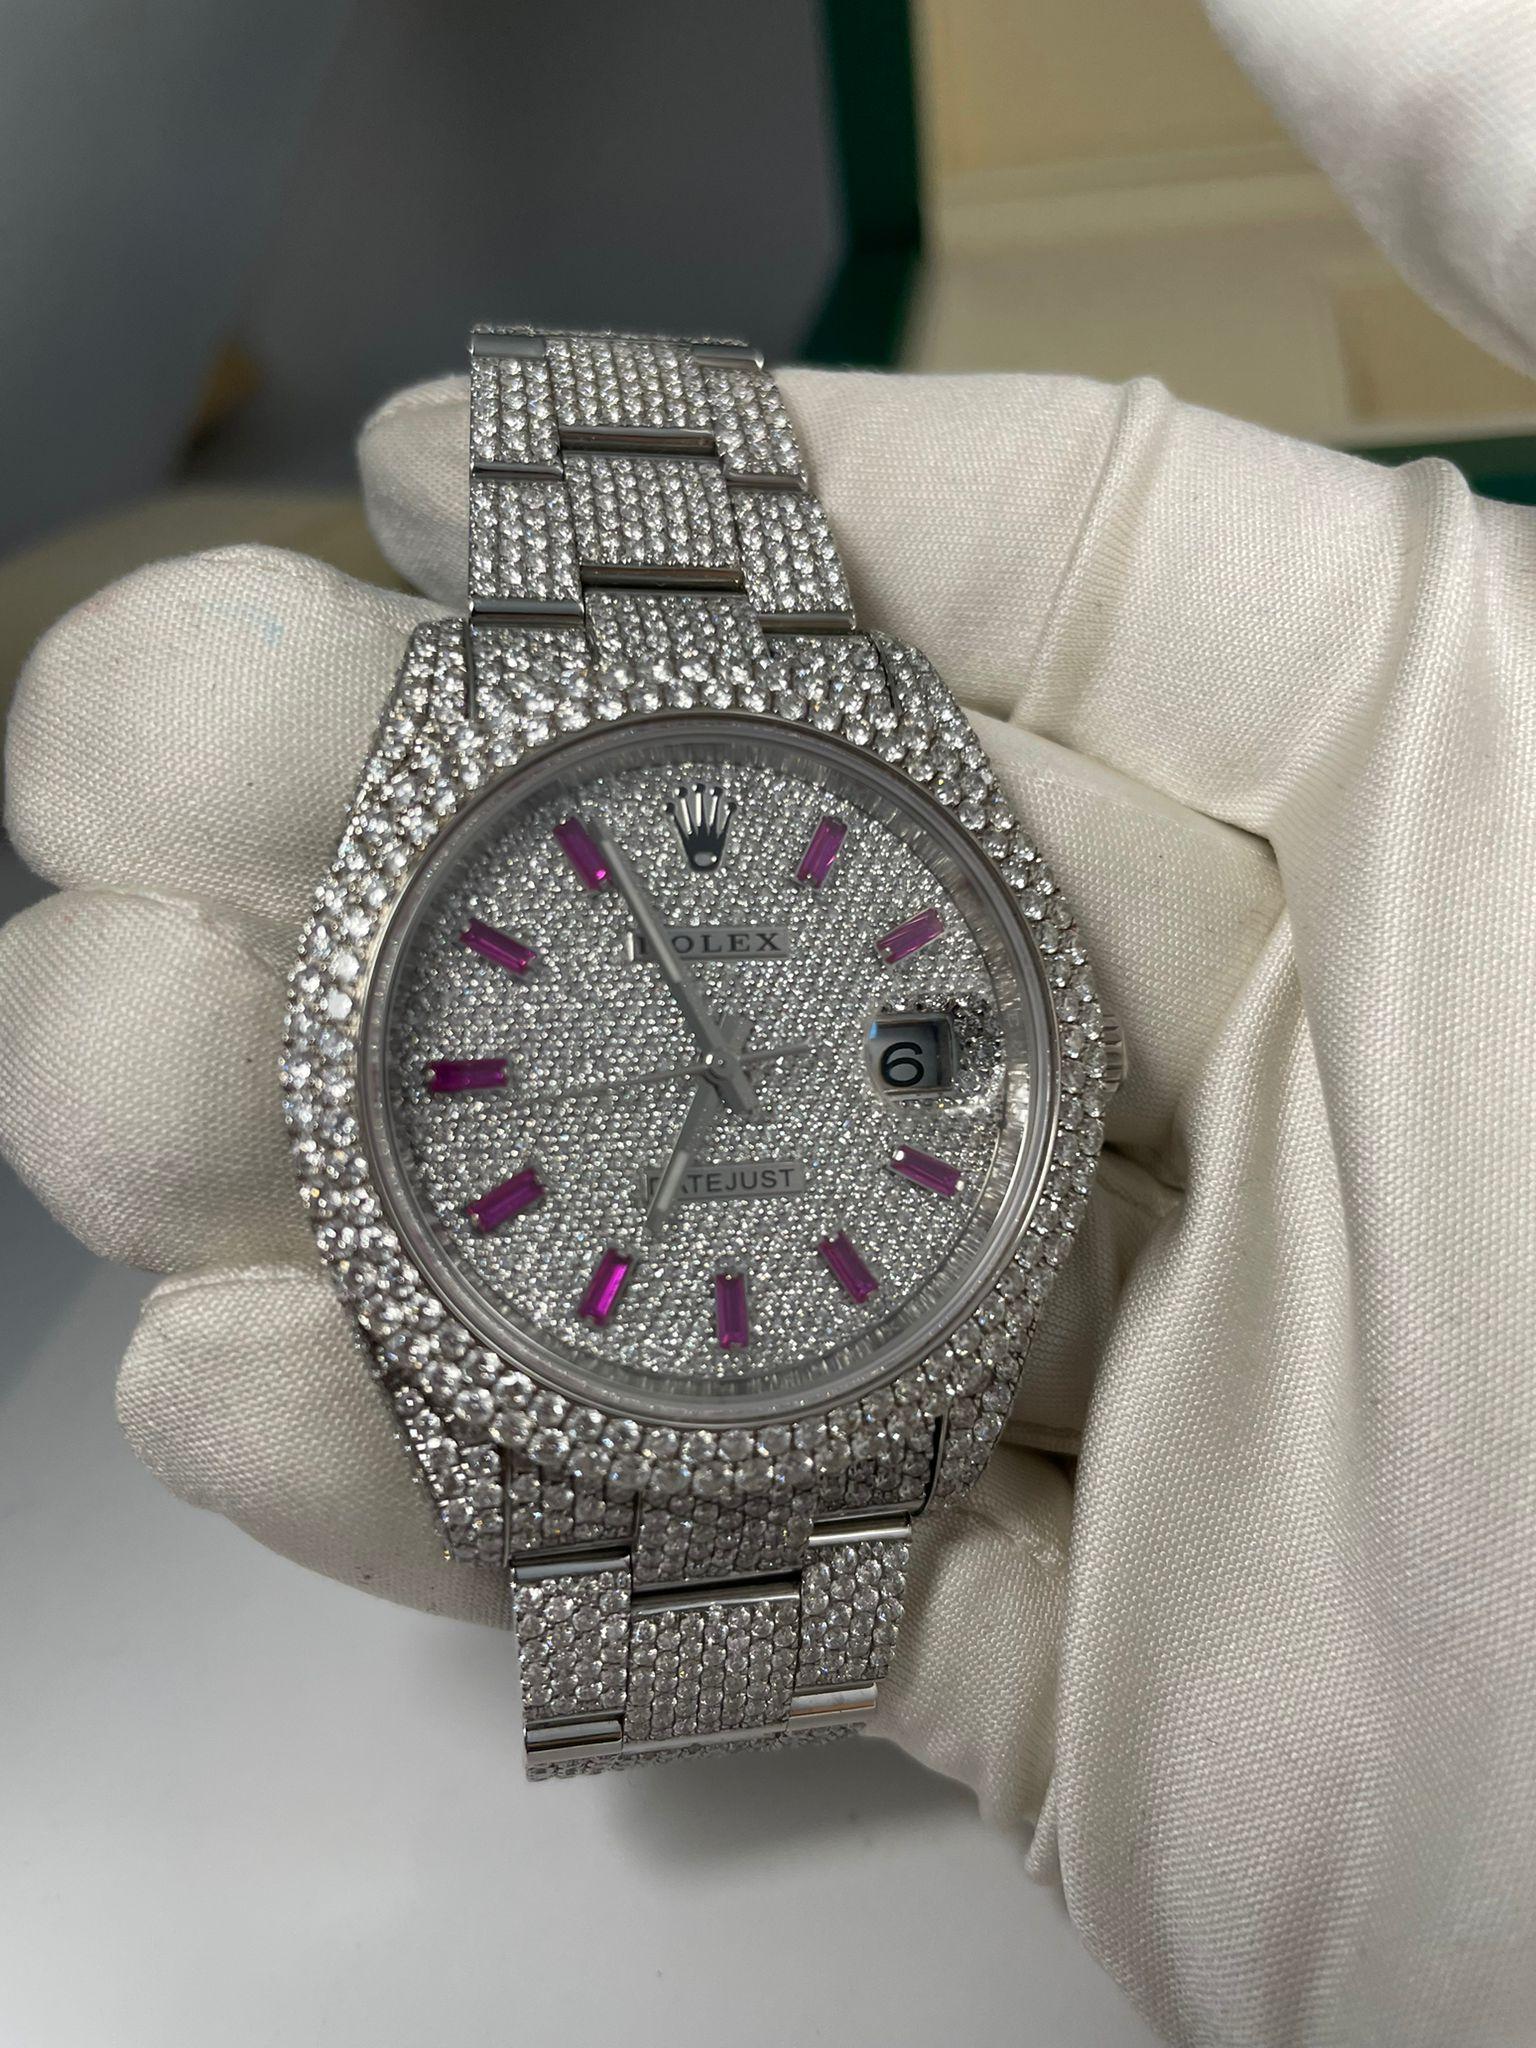 Case Shape: Round

Case Size: 41mm

Case Material: Oyster Steel

Dial: Pave Diamonds Pink Sapphire Hour Markers

Crystal: Scratch Resistant Sapphire

Bezel: Diamond

Water Resistant: 100m/330ft

Clasp: Folding Oysterlock Safety Clasp

Movement: